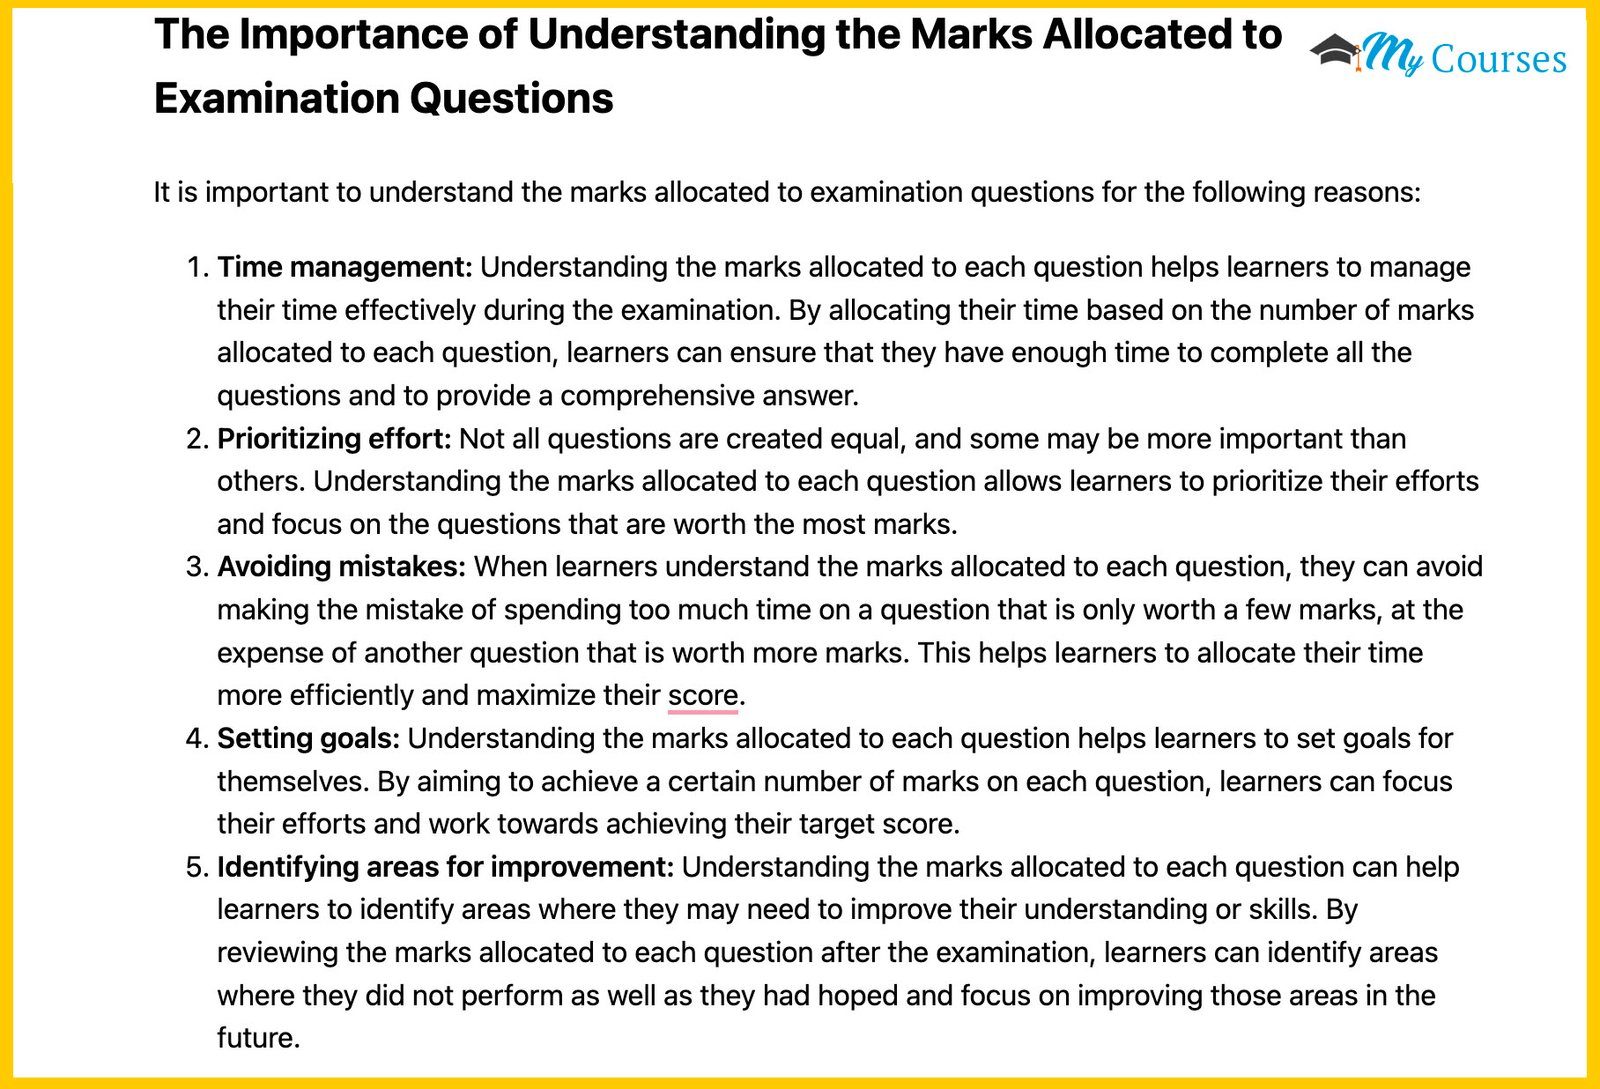 The Importance of Understanding the Marks Allocated to Examination Questions